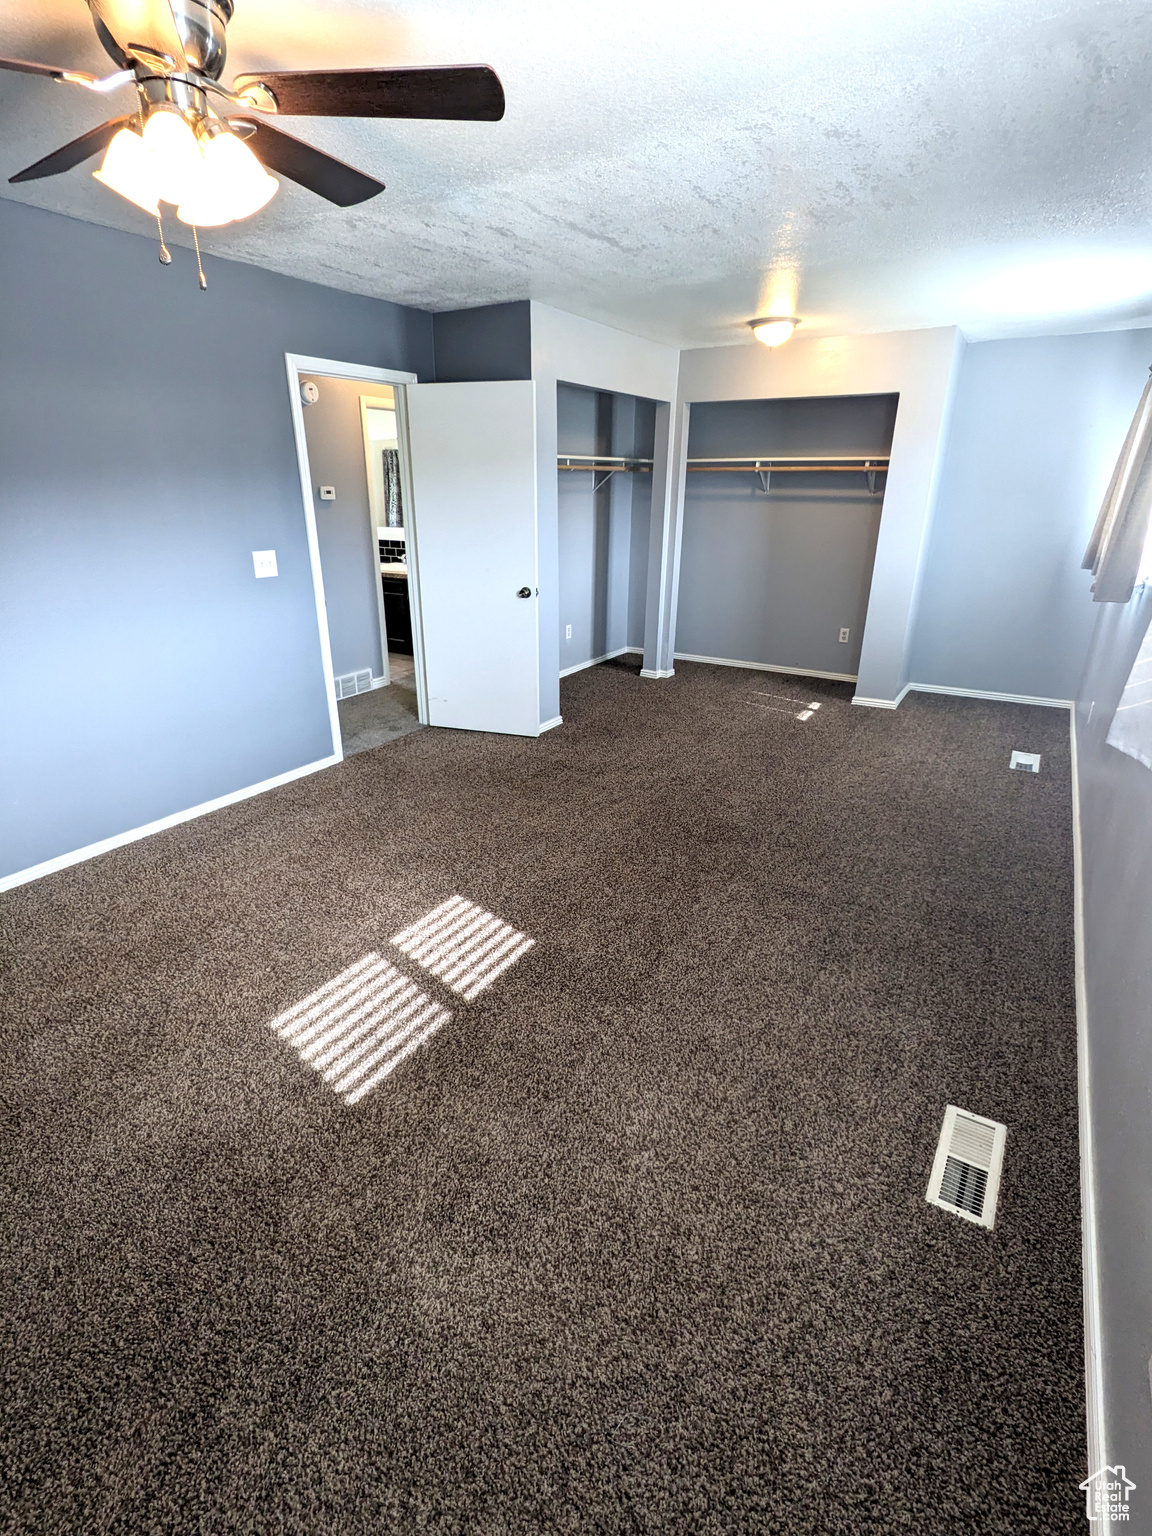 Unfurnished bedroom featuring ceiling fan, carpet floors, and a textured ceiling